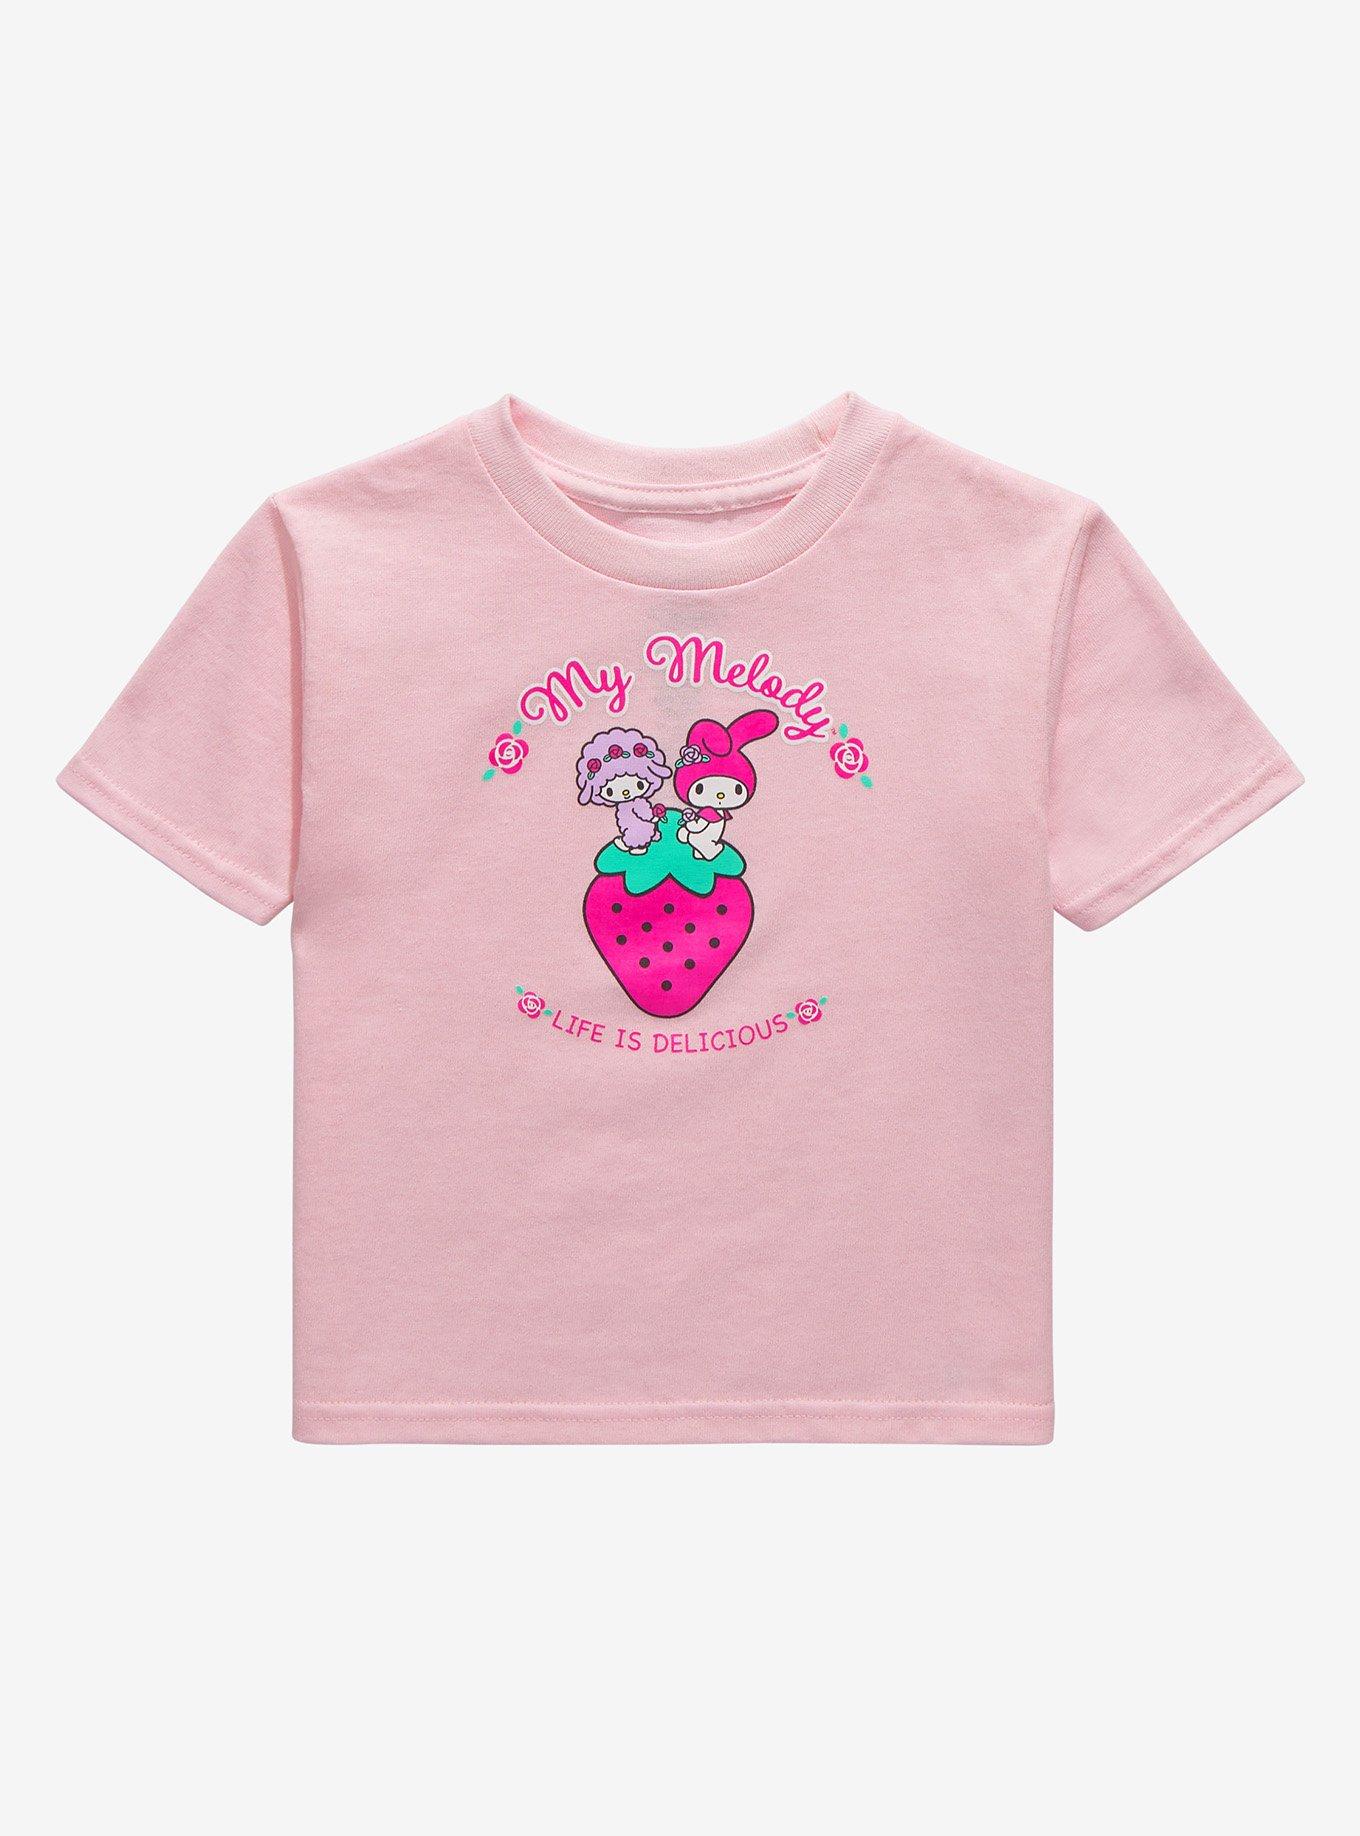 Sanrio My Melody & My Sweet Piano Life is Delicious Toddler T-Shirt - BoxLunch Exclusive, LIGHT PINK, hi-res